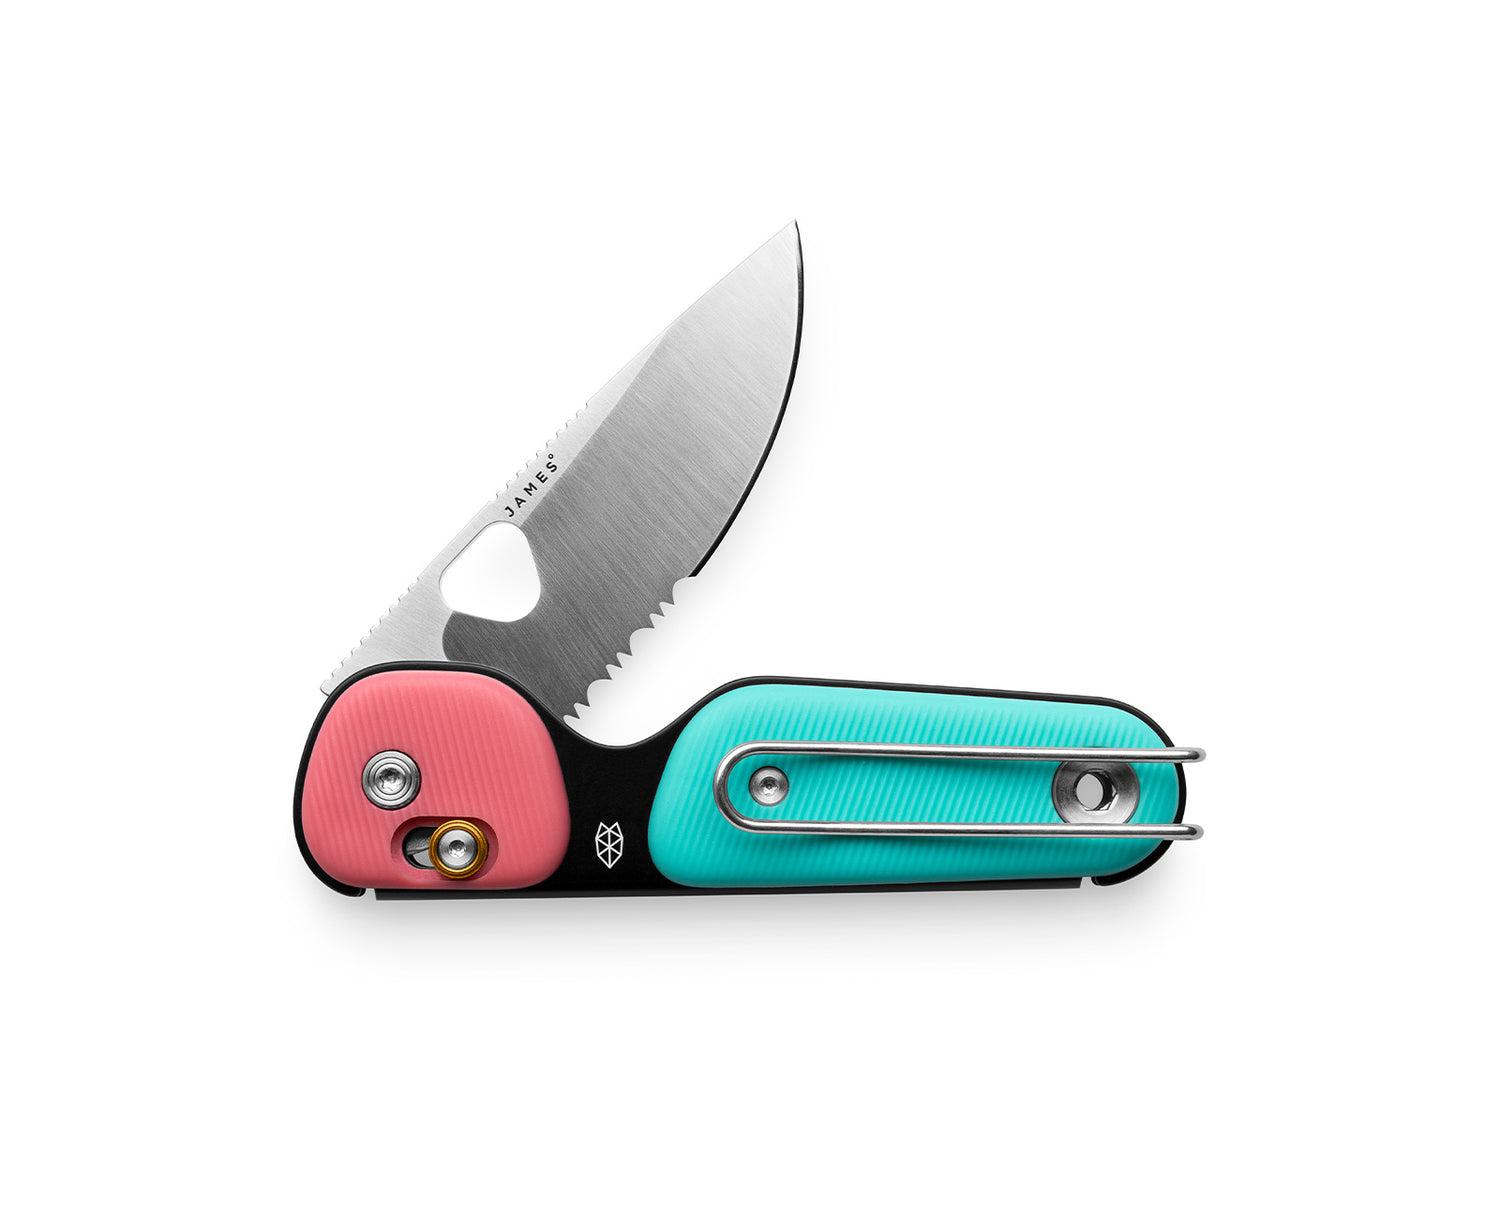 The Redstone knife with coral turquoise handle and stainless steel blade.